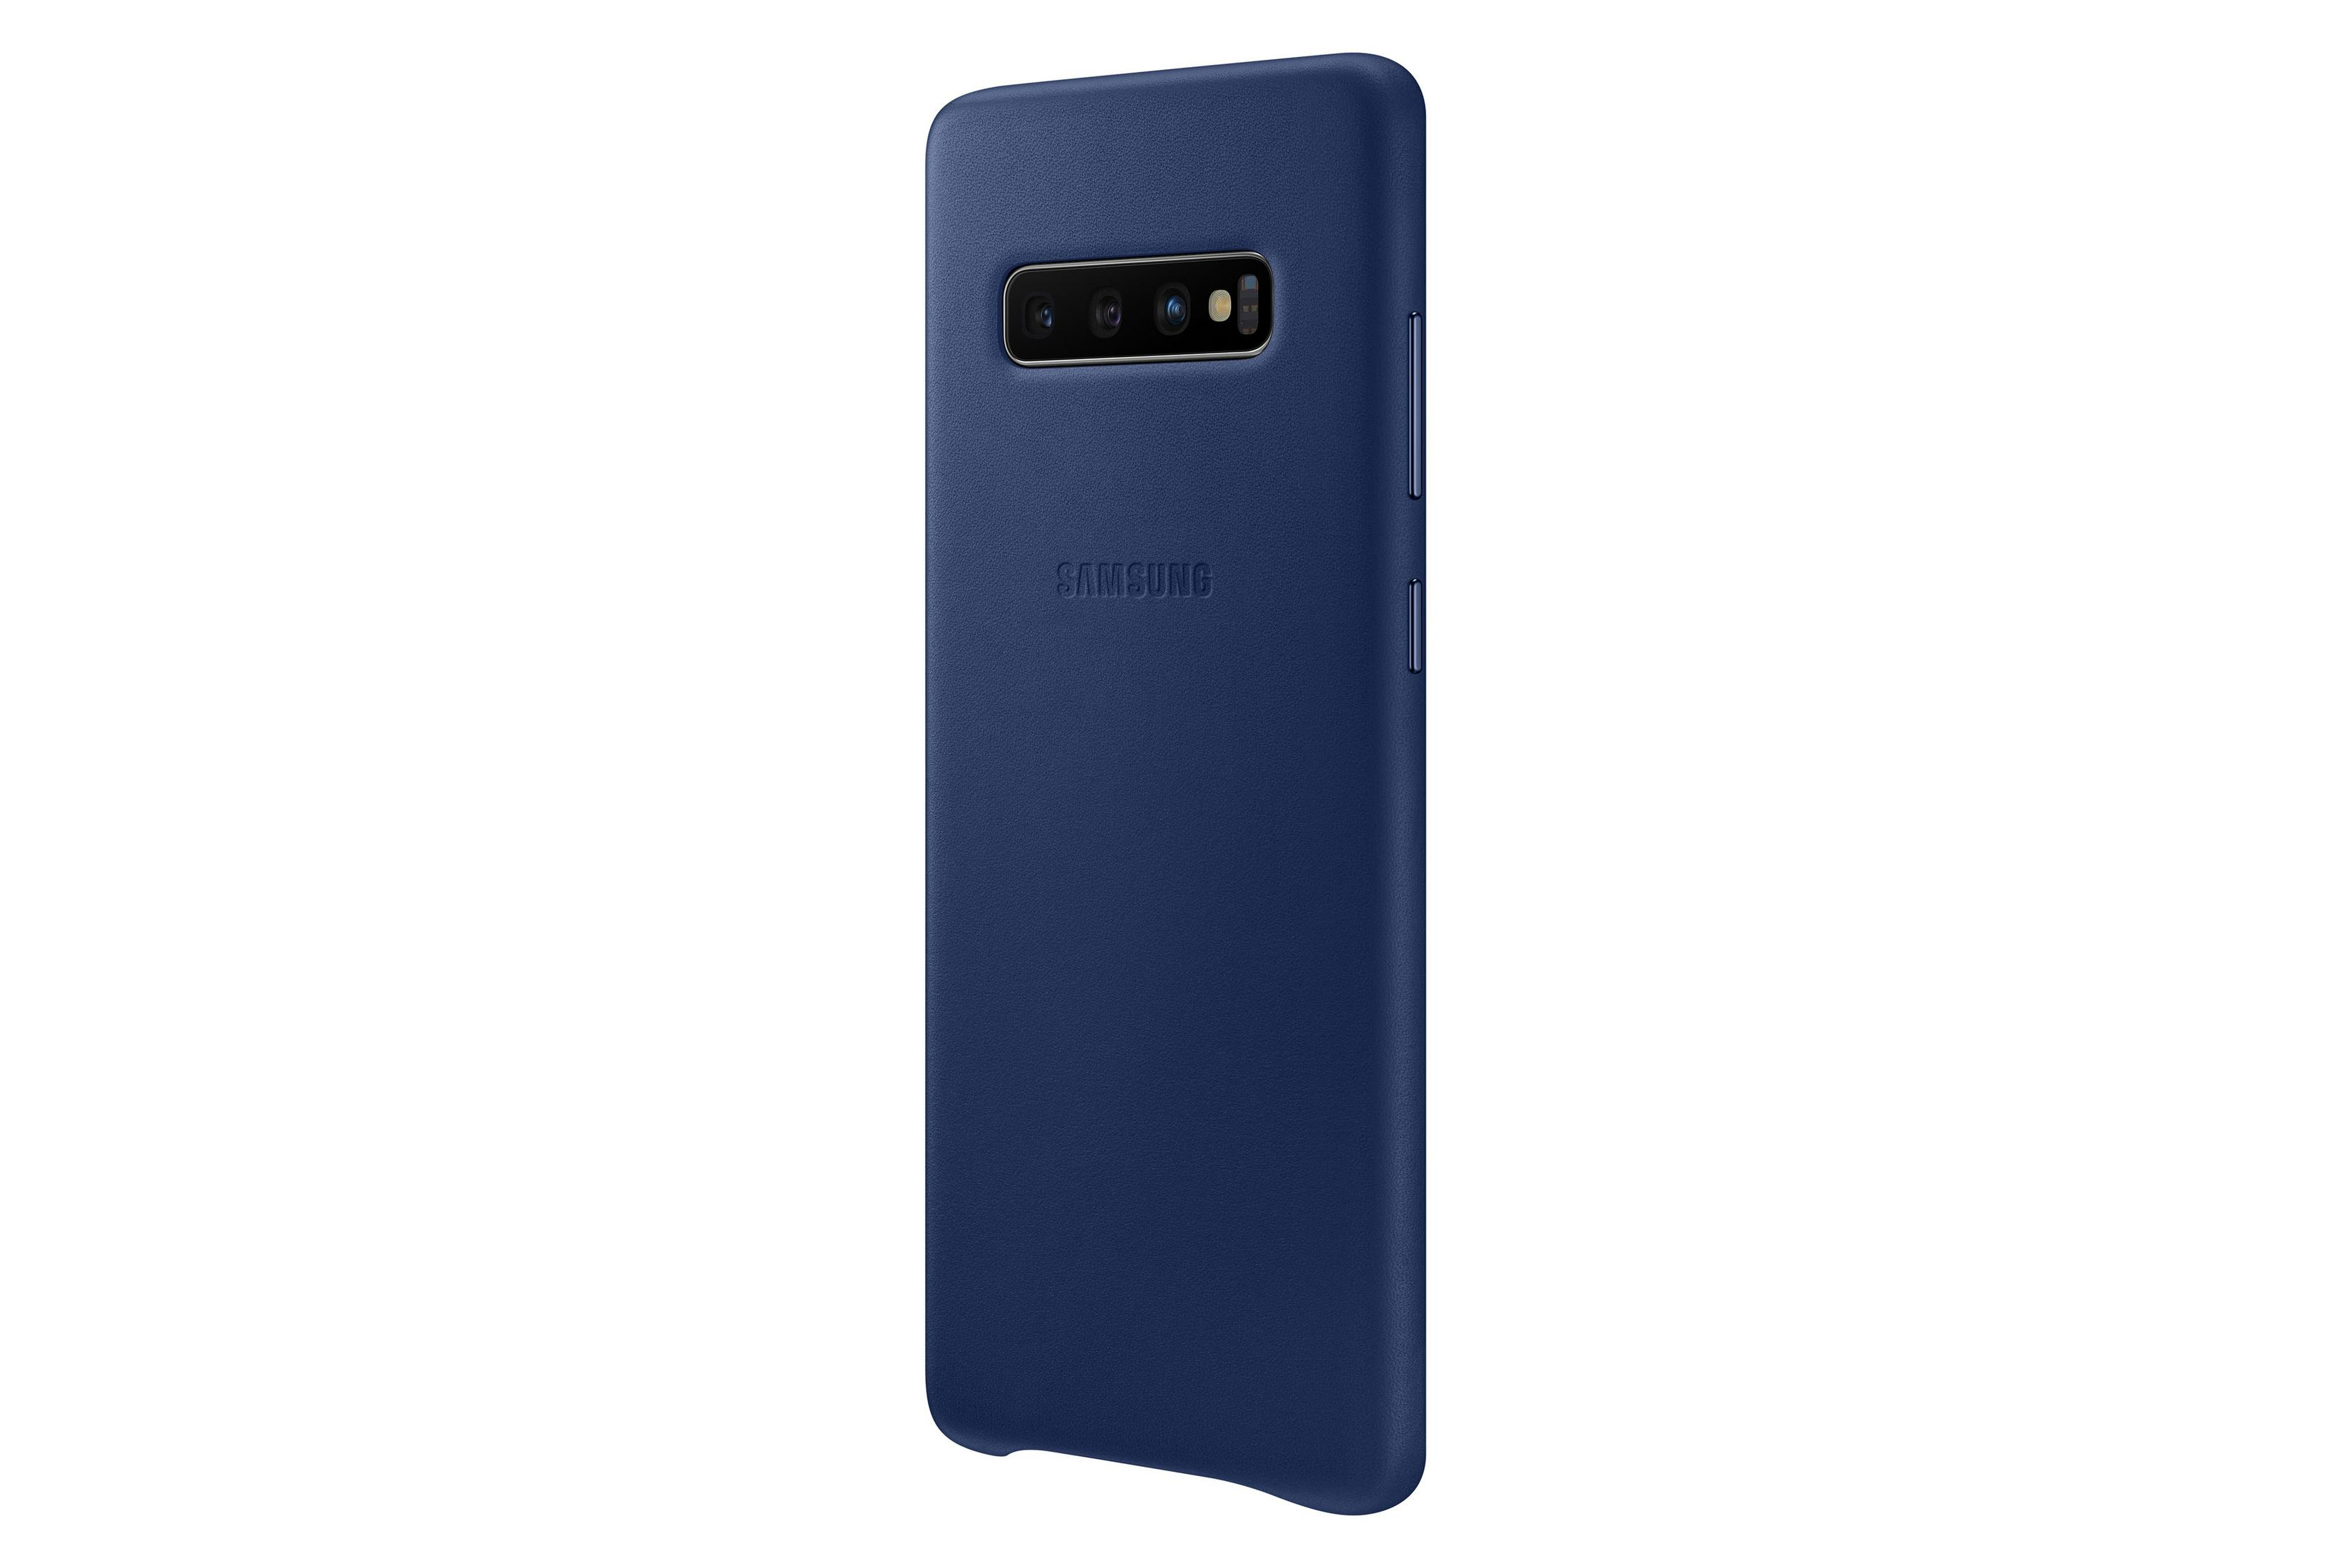 S10+ Backcover, S10+, Samsung, Galaxy COVER SAMSUNG LEATHER NAVY, Navy EF-VG975LNEGWW